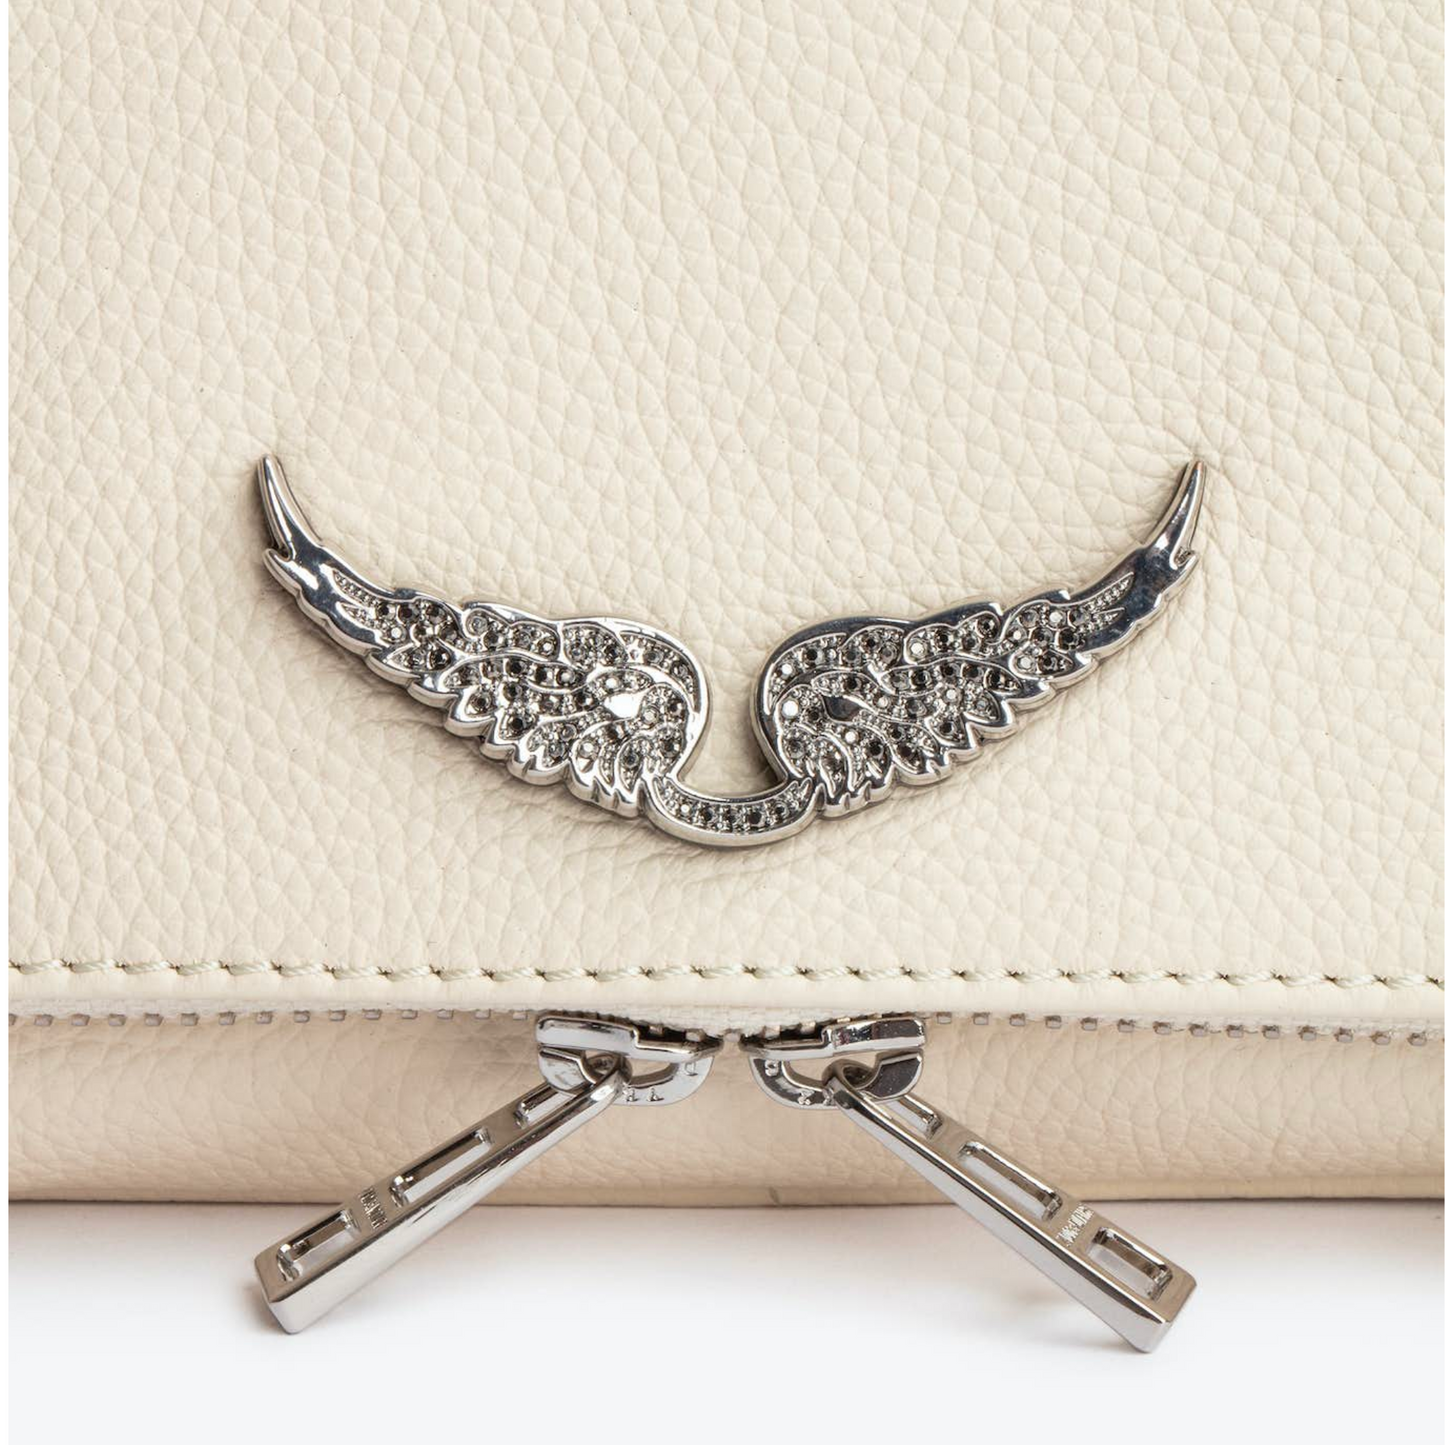 Swing Your Wings Rock Leather Bag